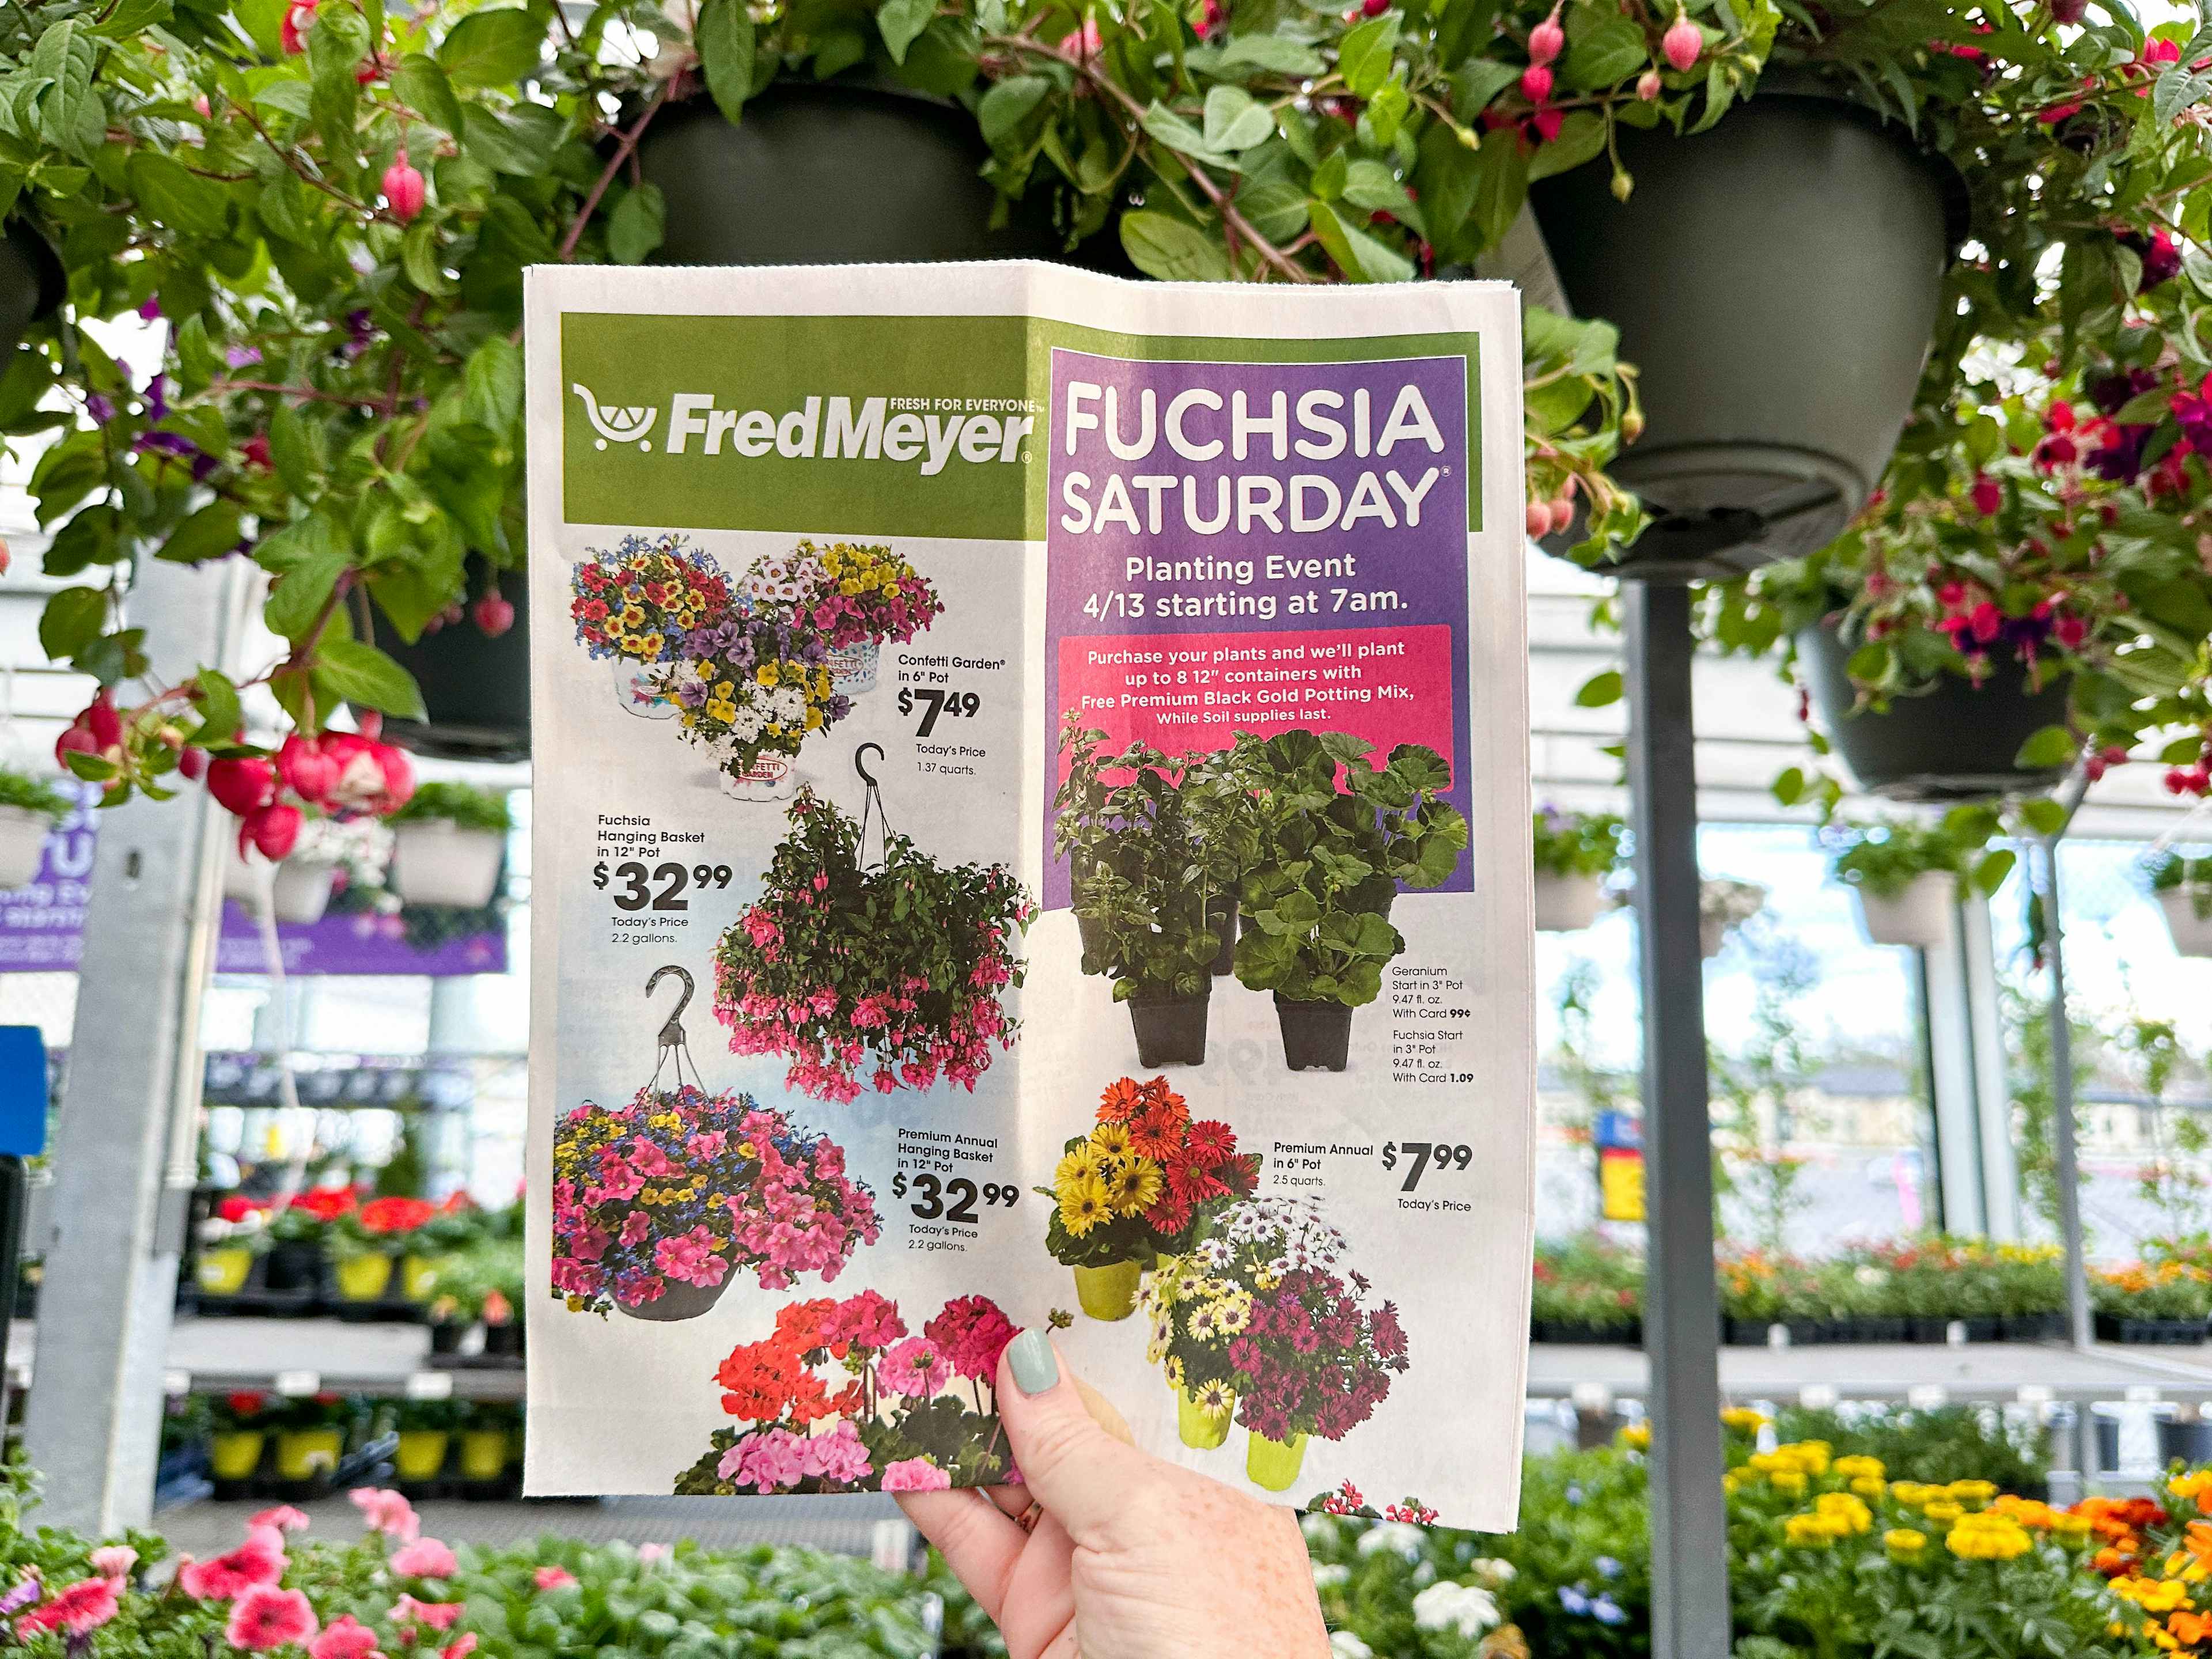 fred-meyers-fuchsia-saturday-planting-event-free-kcl-11